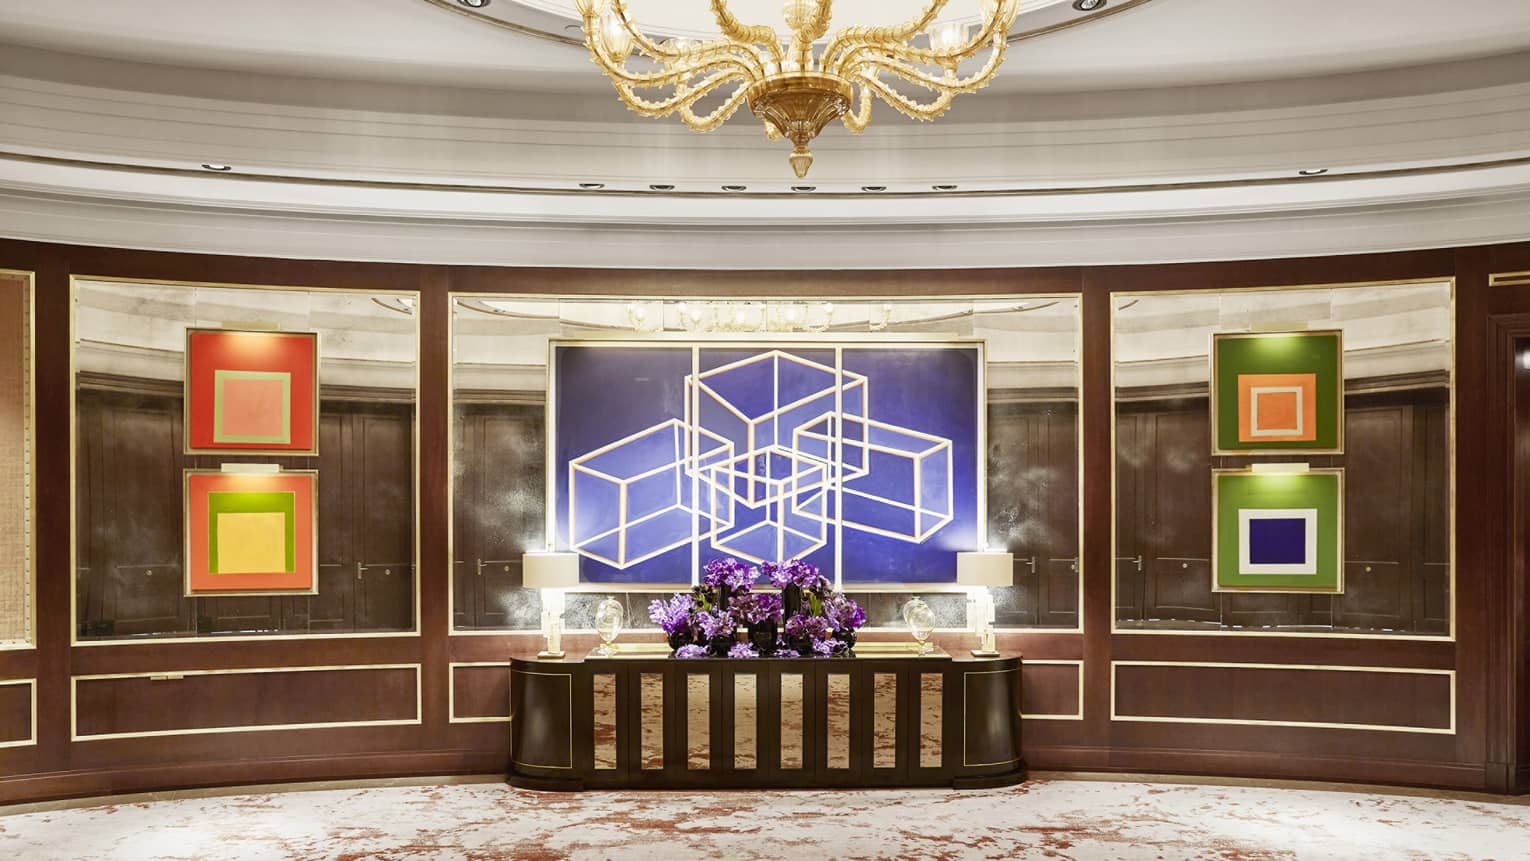 Sol Foyer with mirrored walls, colourful artwork, centre table with purple flowers, gold chandelier